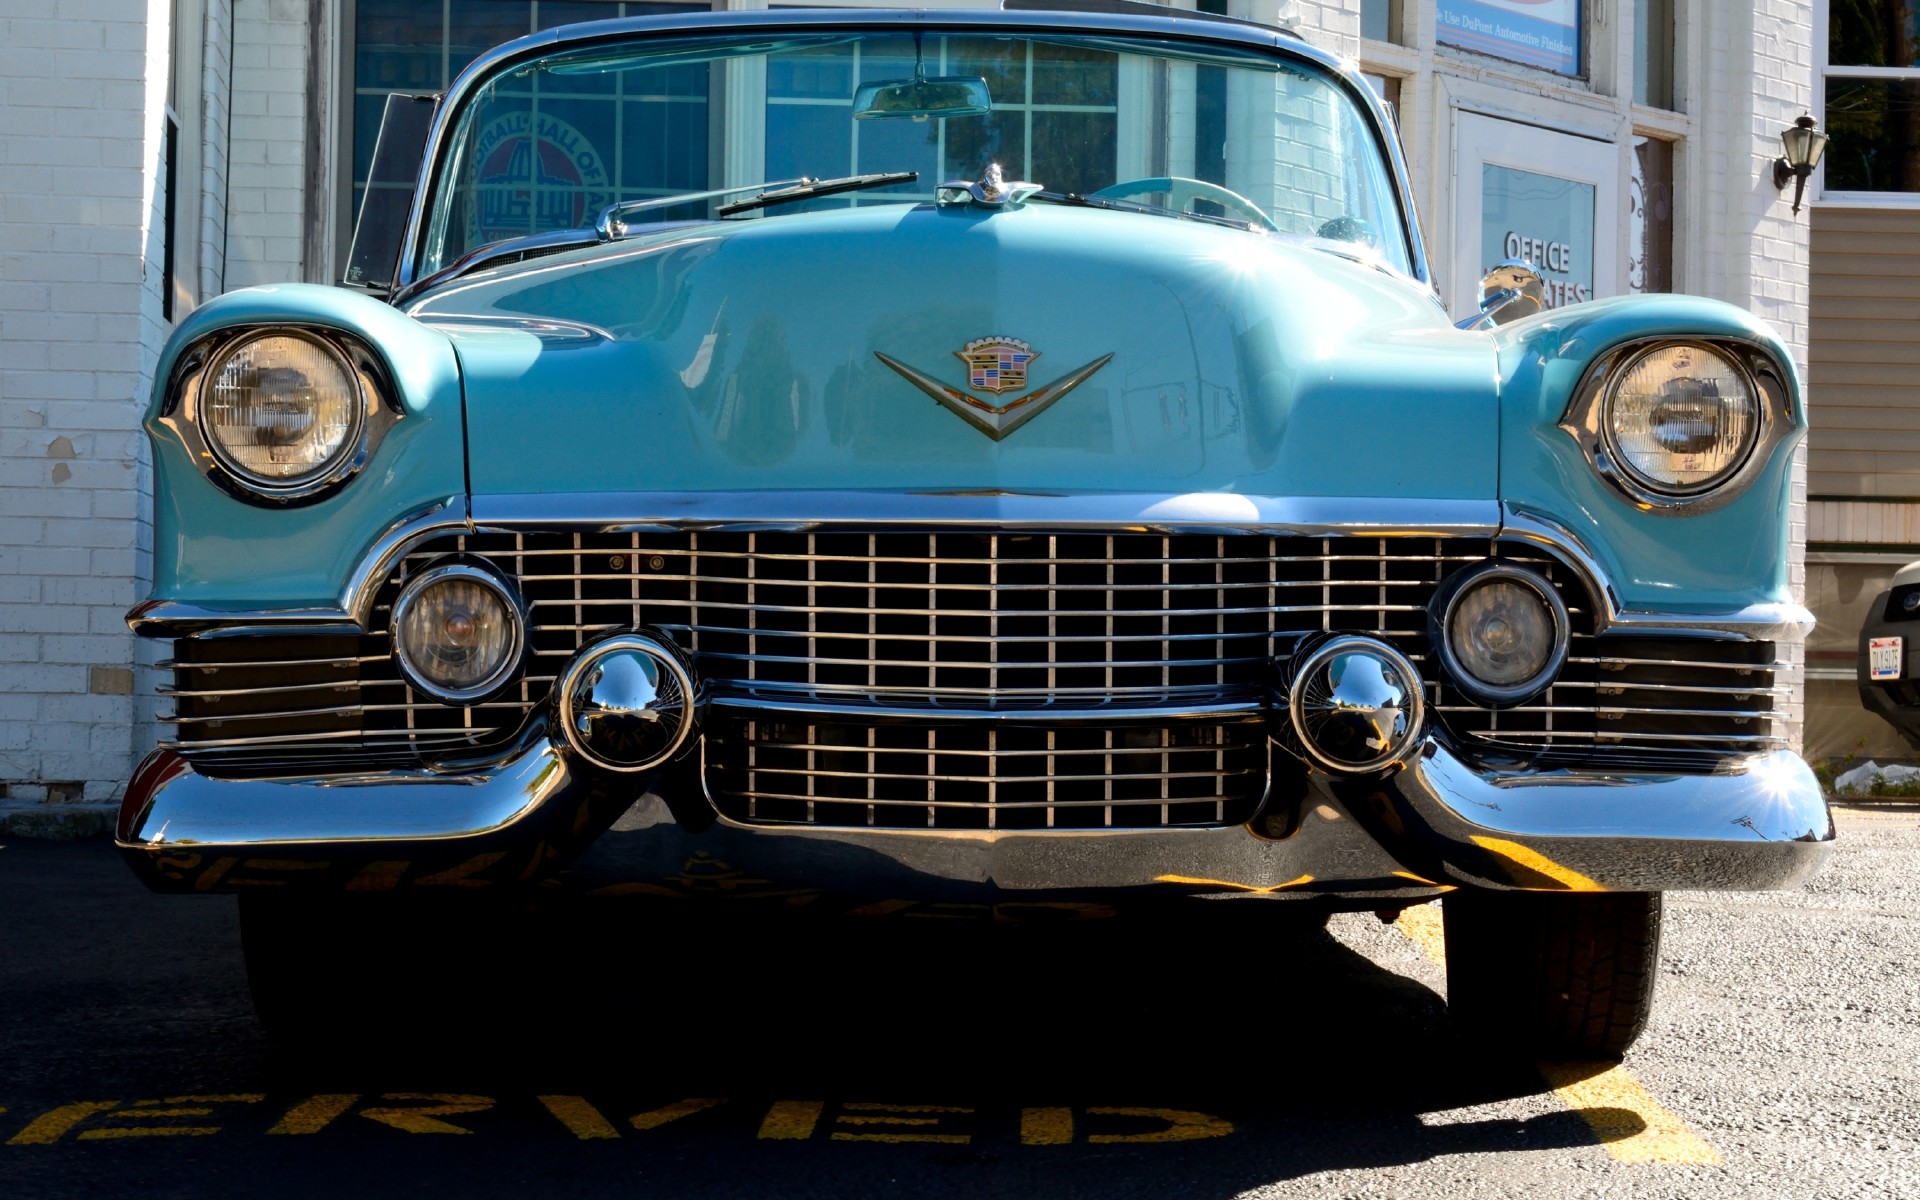 Free Download Wallpaper Vintage Cadillac Vintage Cadillac Old Cadillac Classic 1920x1200 For Your Desktop Mobile Tablet Explore 47 Classic Cadillac Wallpaper Cadillac Escalade Wallpaper Cadillac Ats Wallpaper Cadillac Cts V Wallpaper